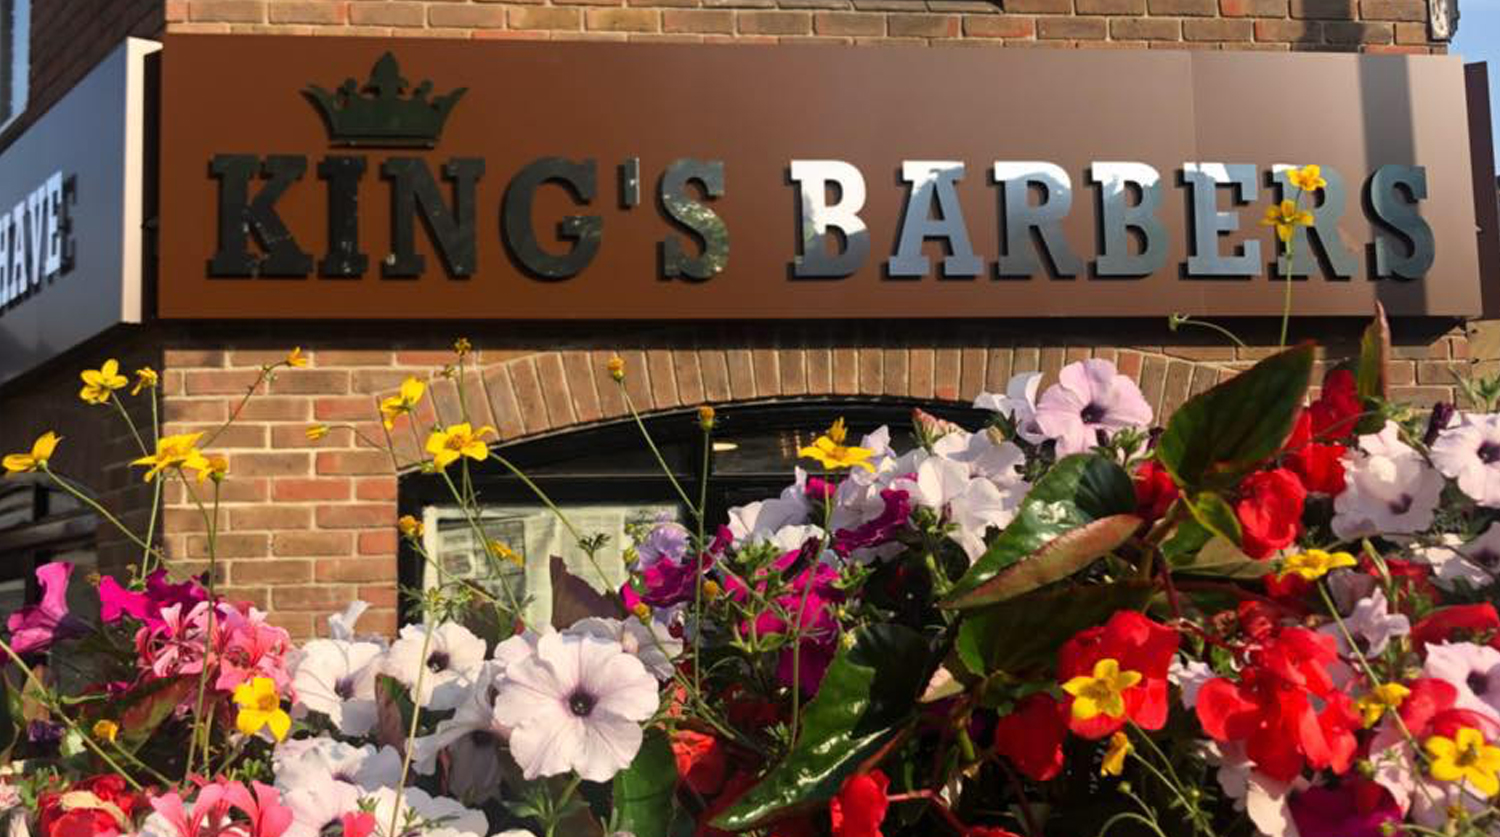 - LISTING PAGE - King's Barbers